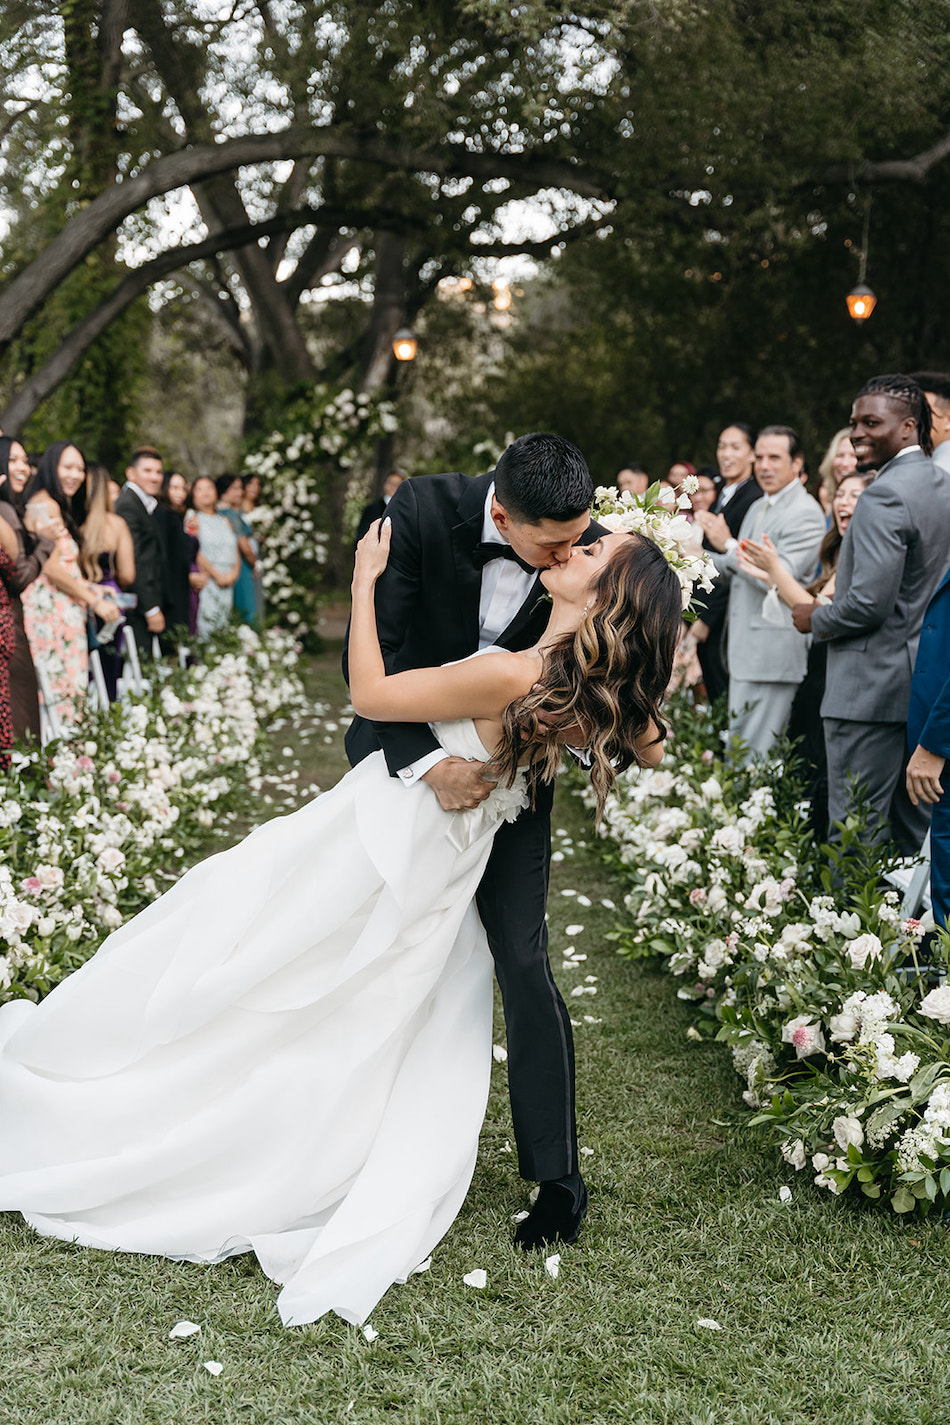 first kiss, just married, dip kiss, floral design, florist, wedding florist, wedding flowers, orange county weddings, orange county wedding florist, orange county florist, orange county floral design, flowers by cina